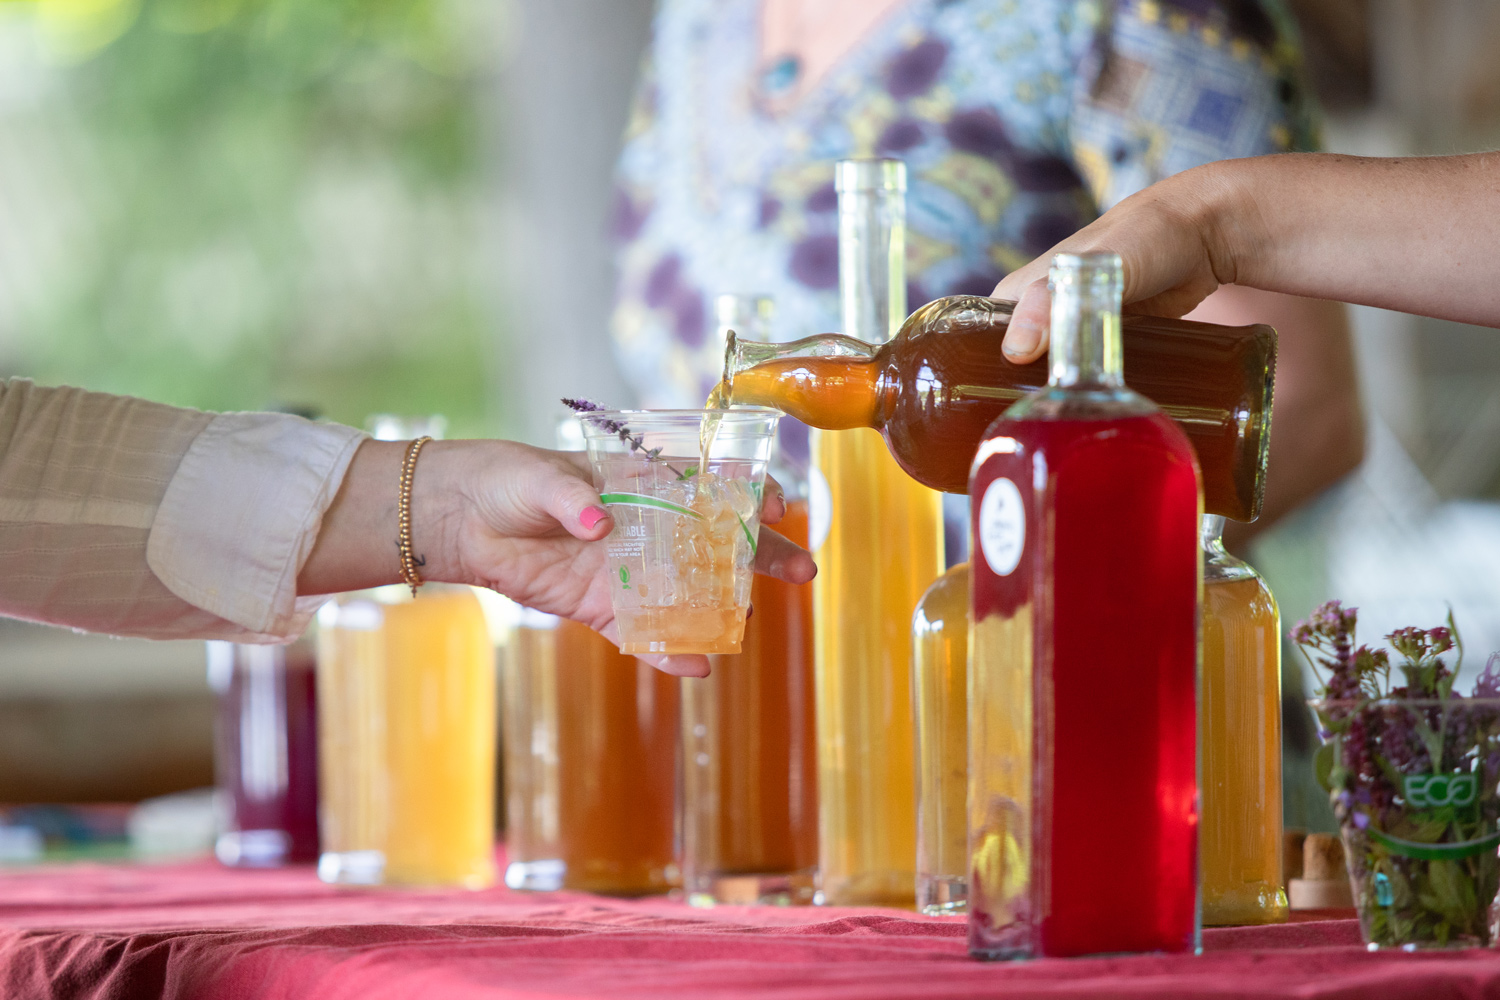 A person pours a beverage from a large bottle into a glass held by another person at a table with multiple bottles of colorful herbal syrups on a table.